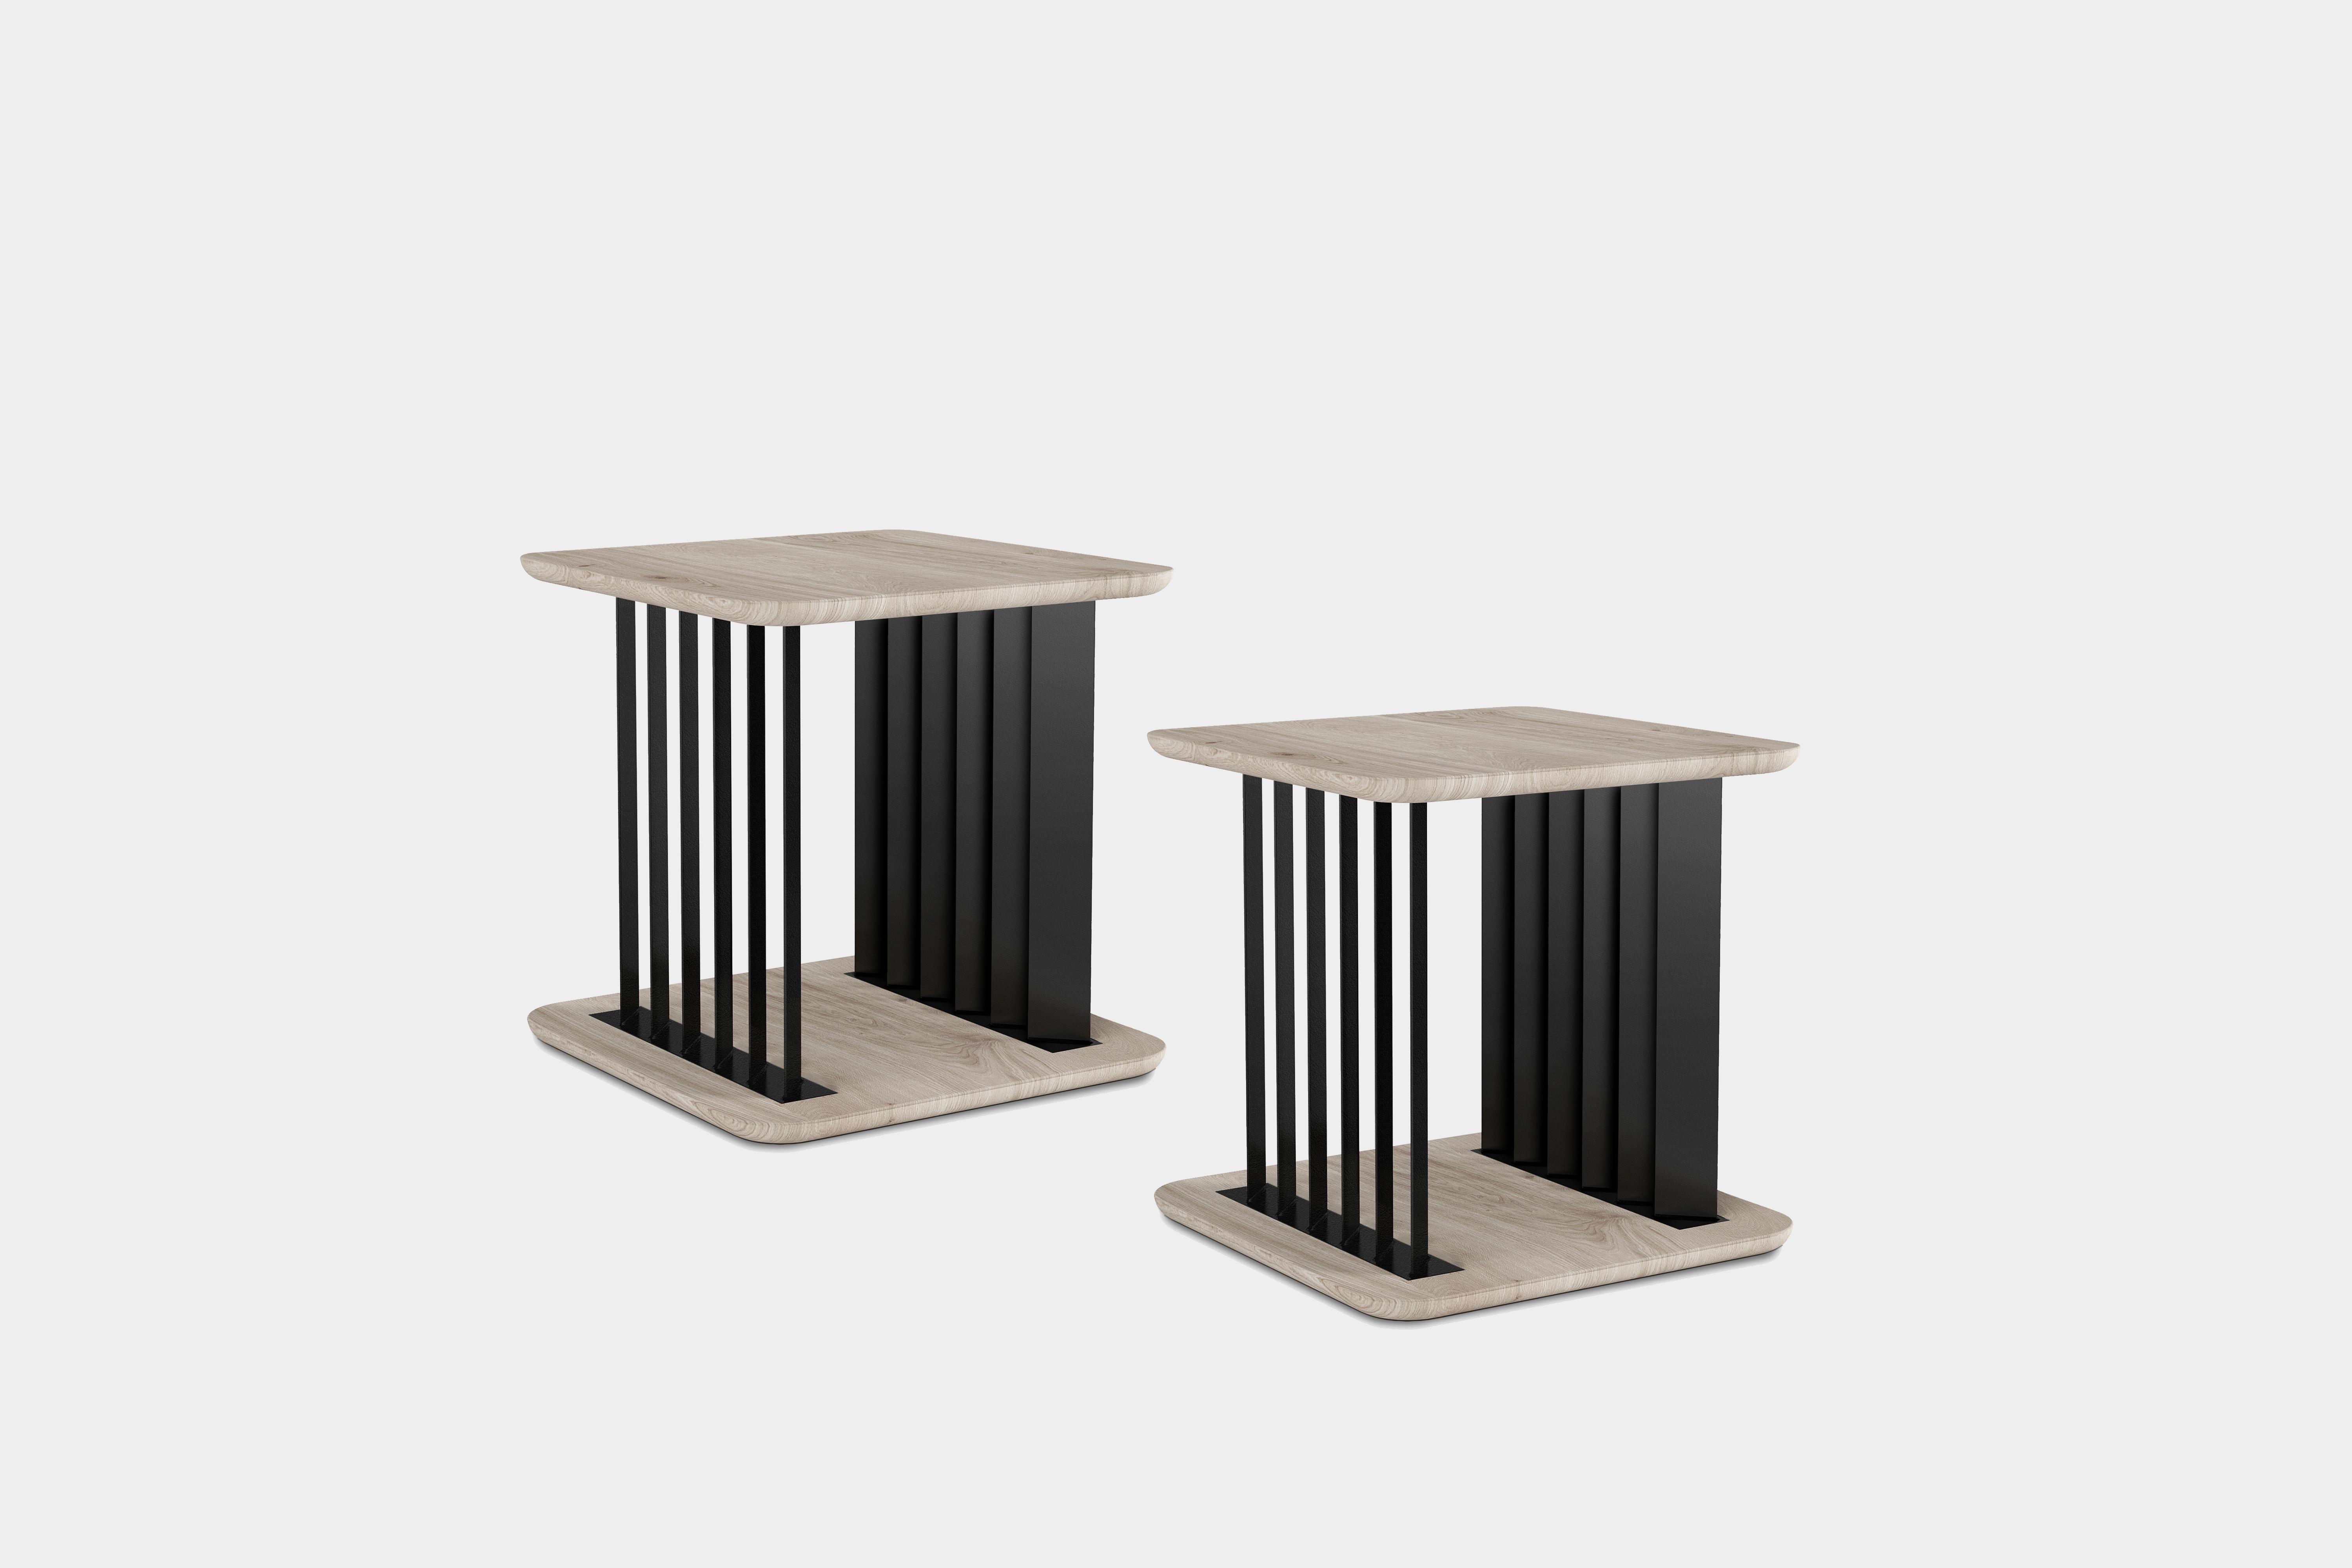 Set of Two Plateau Side Tables, Night Stand in Grey Wood and Metal Structure

Inspired by the majesty of mountain systems throughout the Americas, Plateau makes reference to the small surfaces that emerge from a vast piece of land peculiar for its